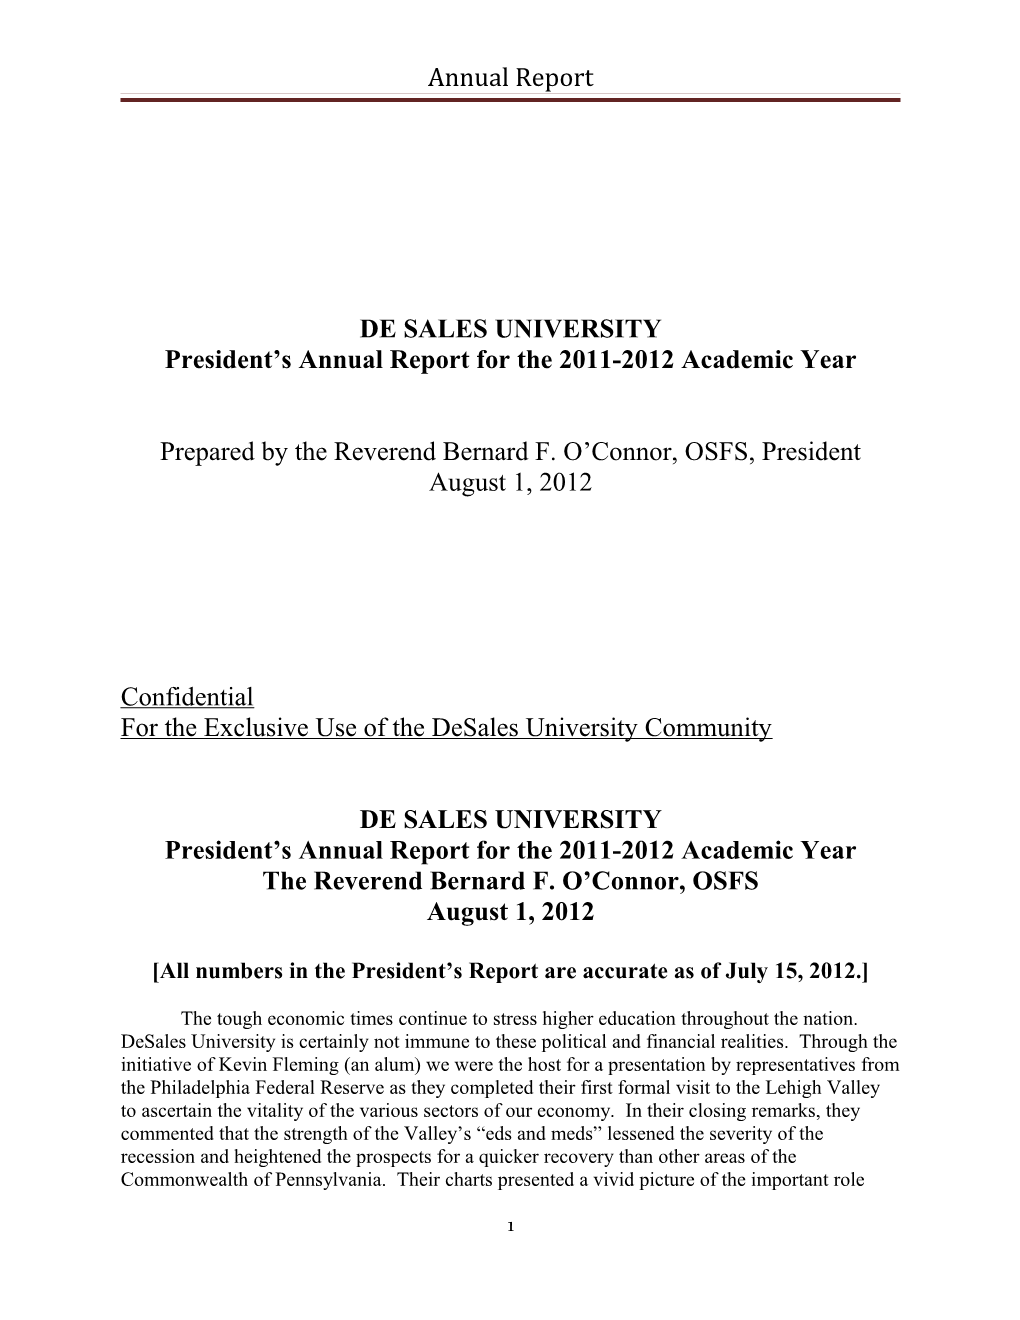 President S Annual Report for the 2011-2012 Academic Year